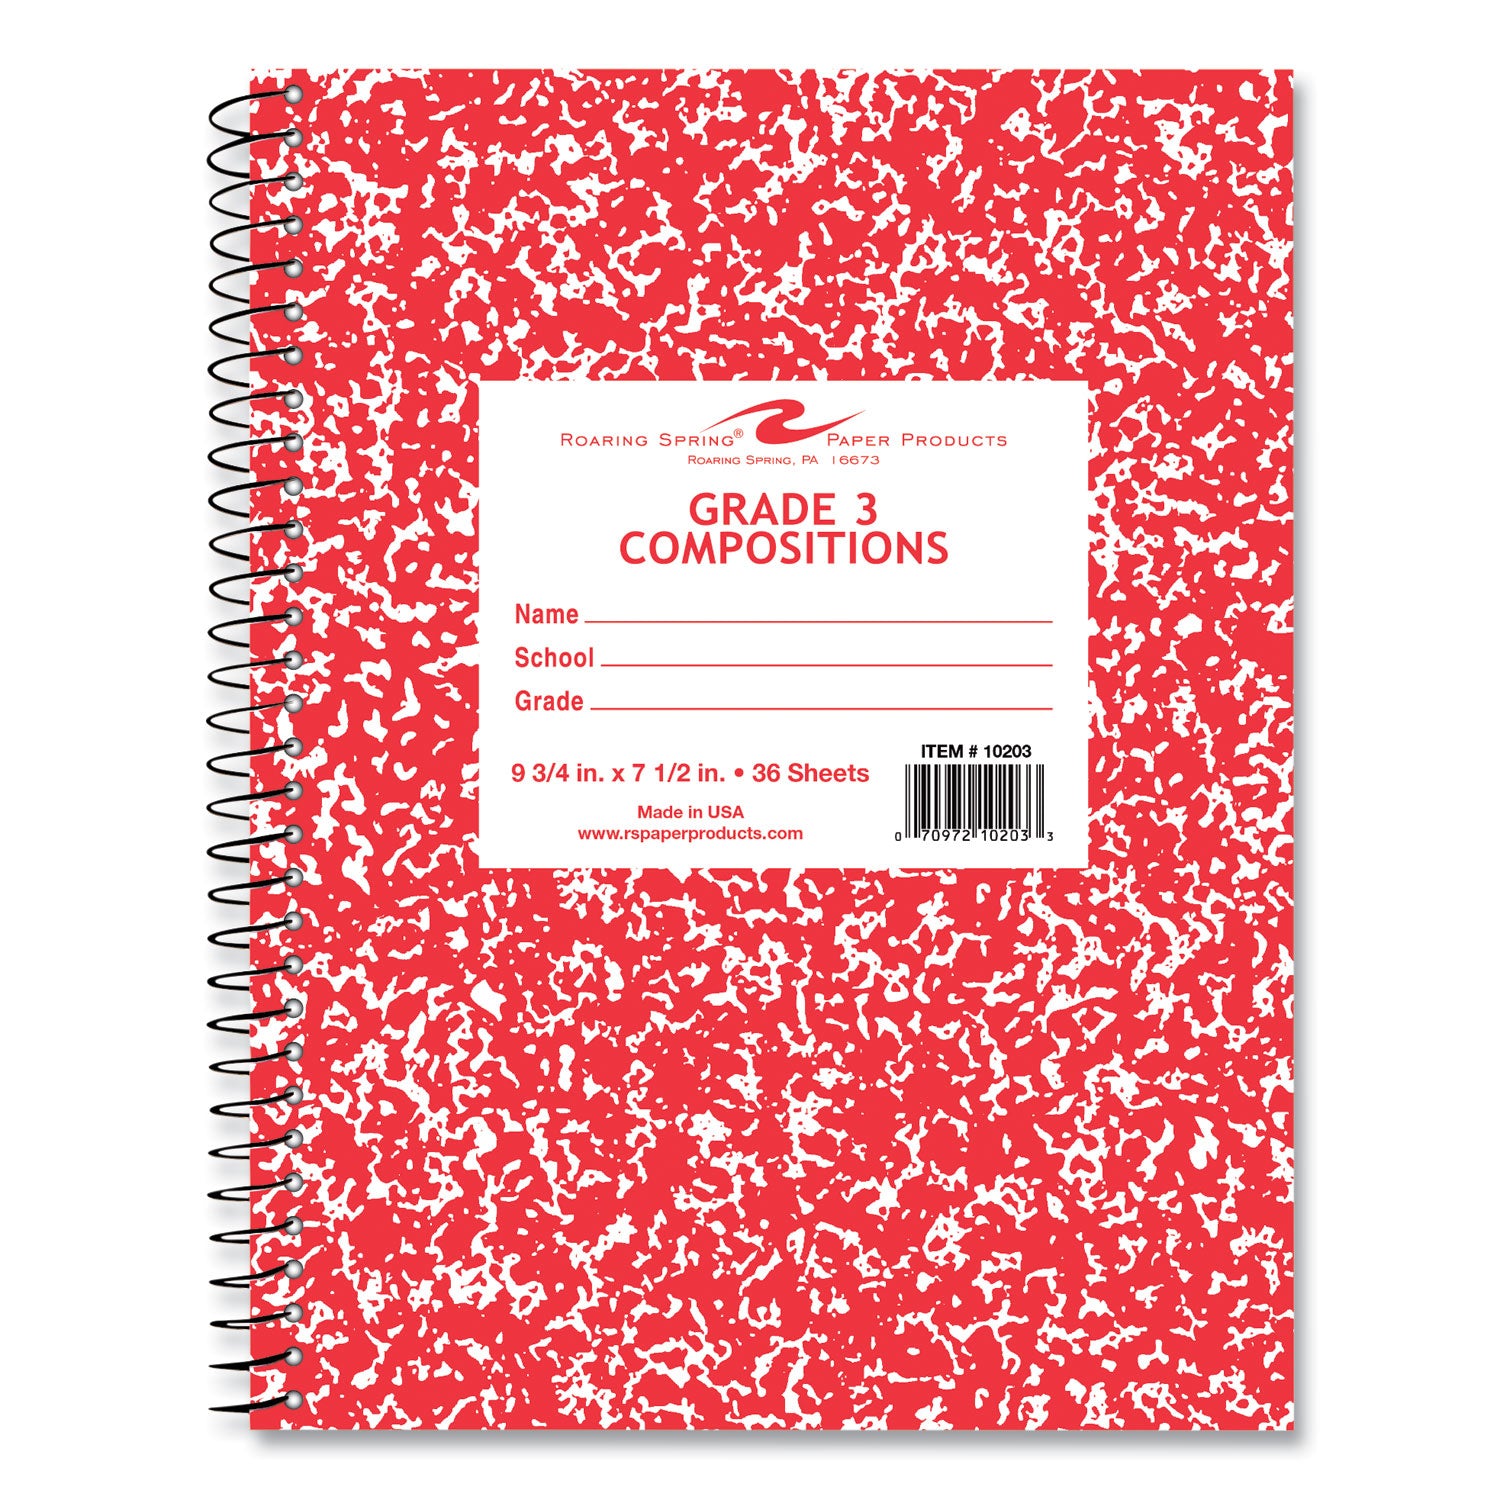 wirebound-composition-book-1-sub-grade-1-manuscript-format-red-cover-36-975-x-75-sheet-48-ct-ships-in-4-6-bus-days_roa10203cs - 2